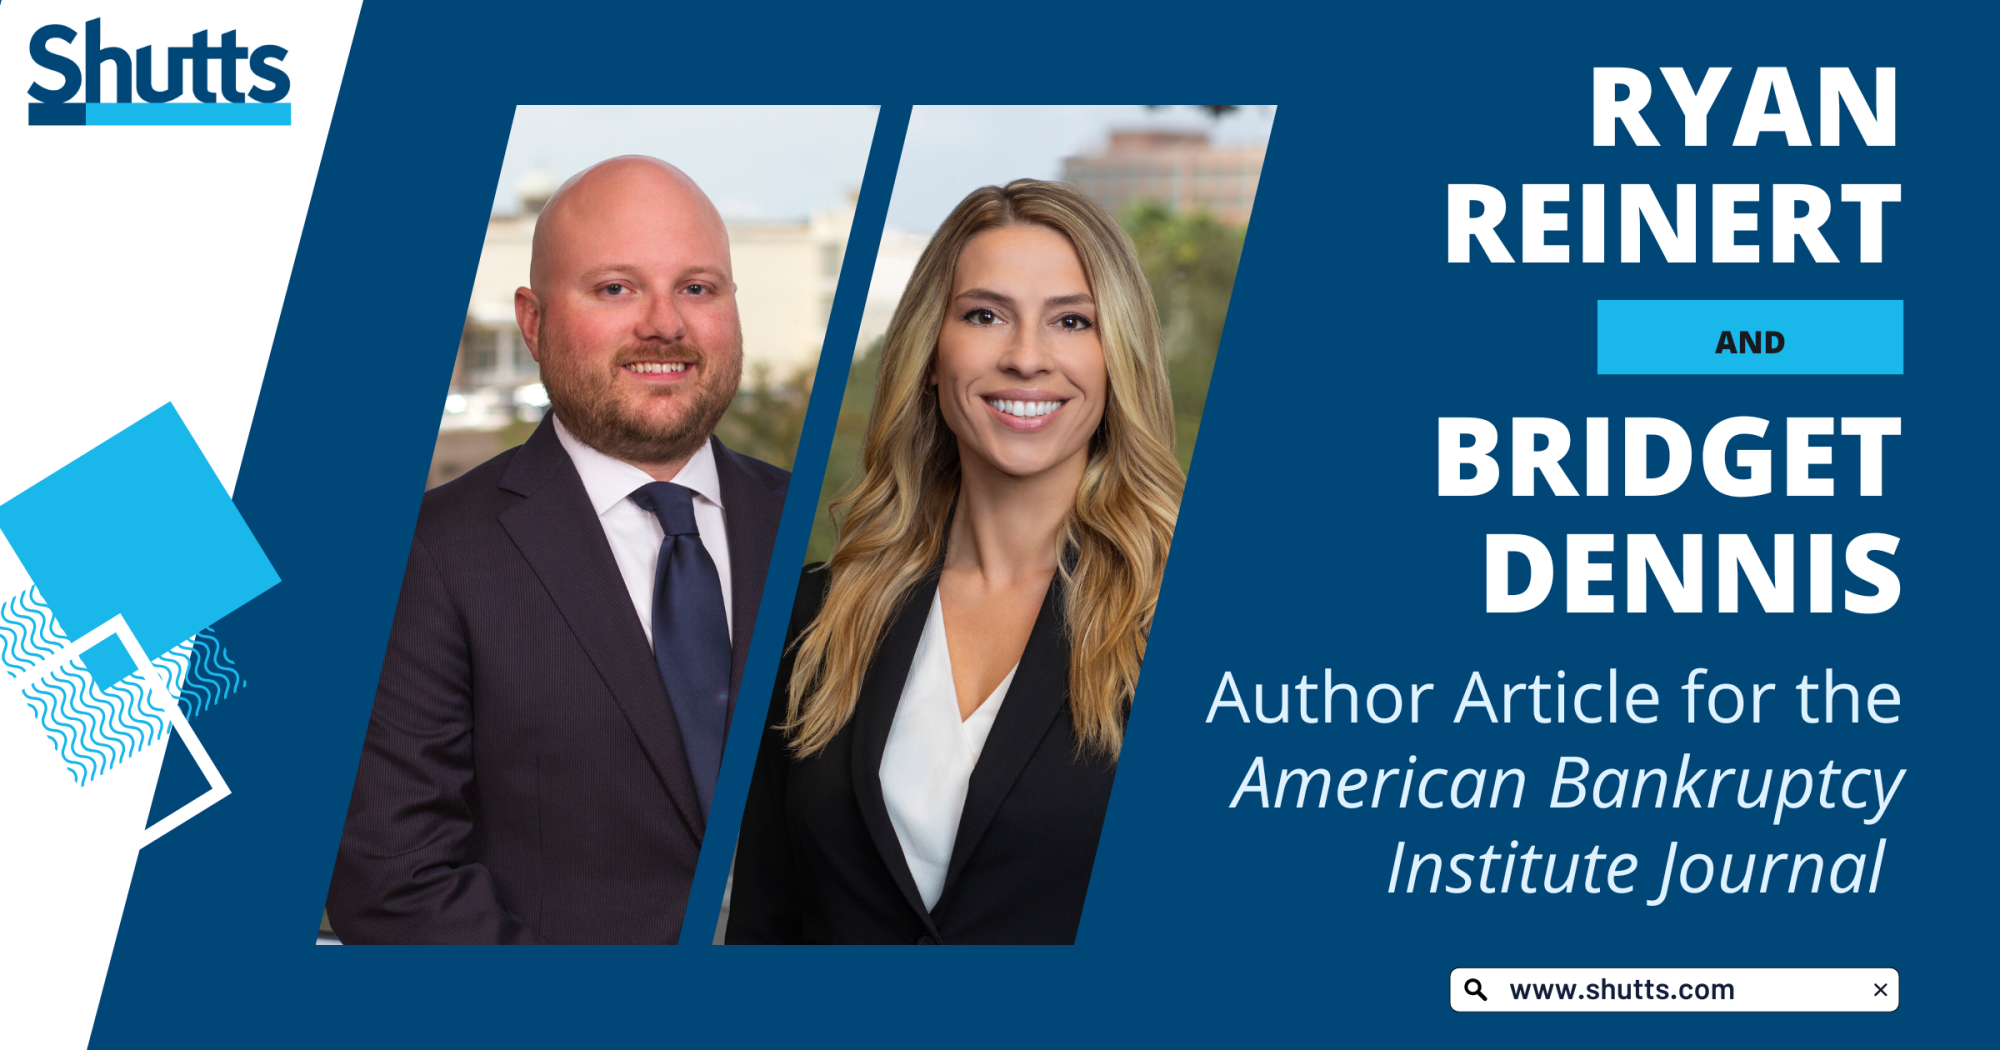 Ryan Reinert and Bridget Dennis Author Article for the American Bankruptcy Institute Journal